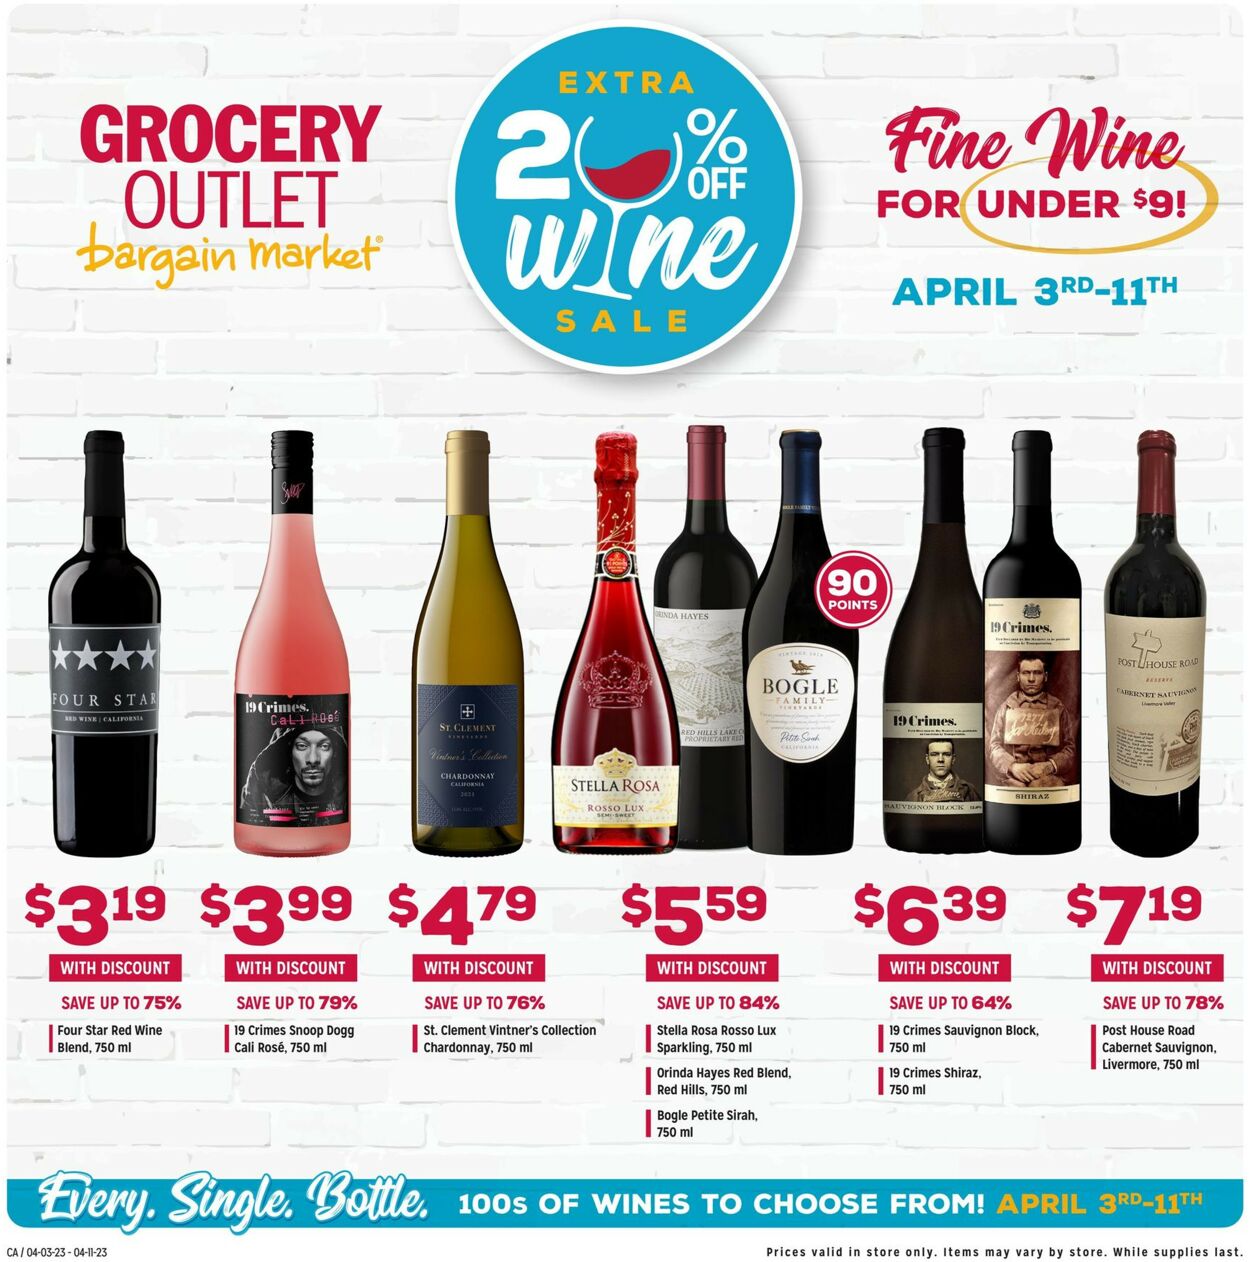 Grocery Outlet Weekly Ad Circular - valid 03/29-04/04/2023